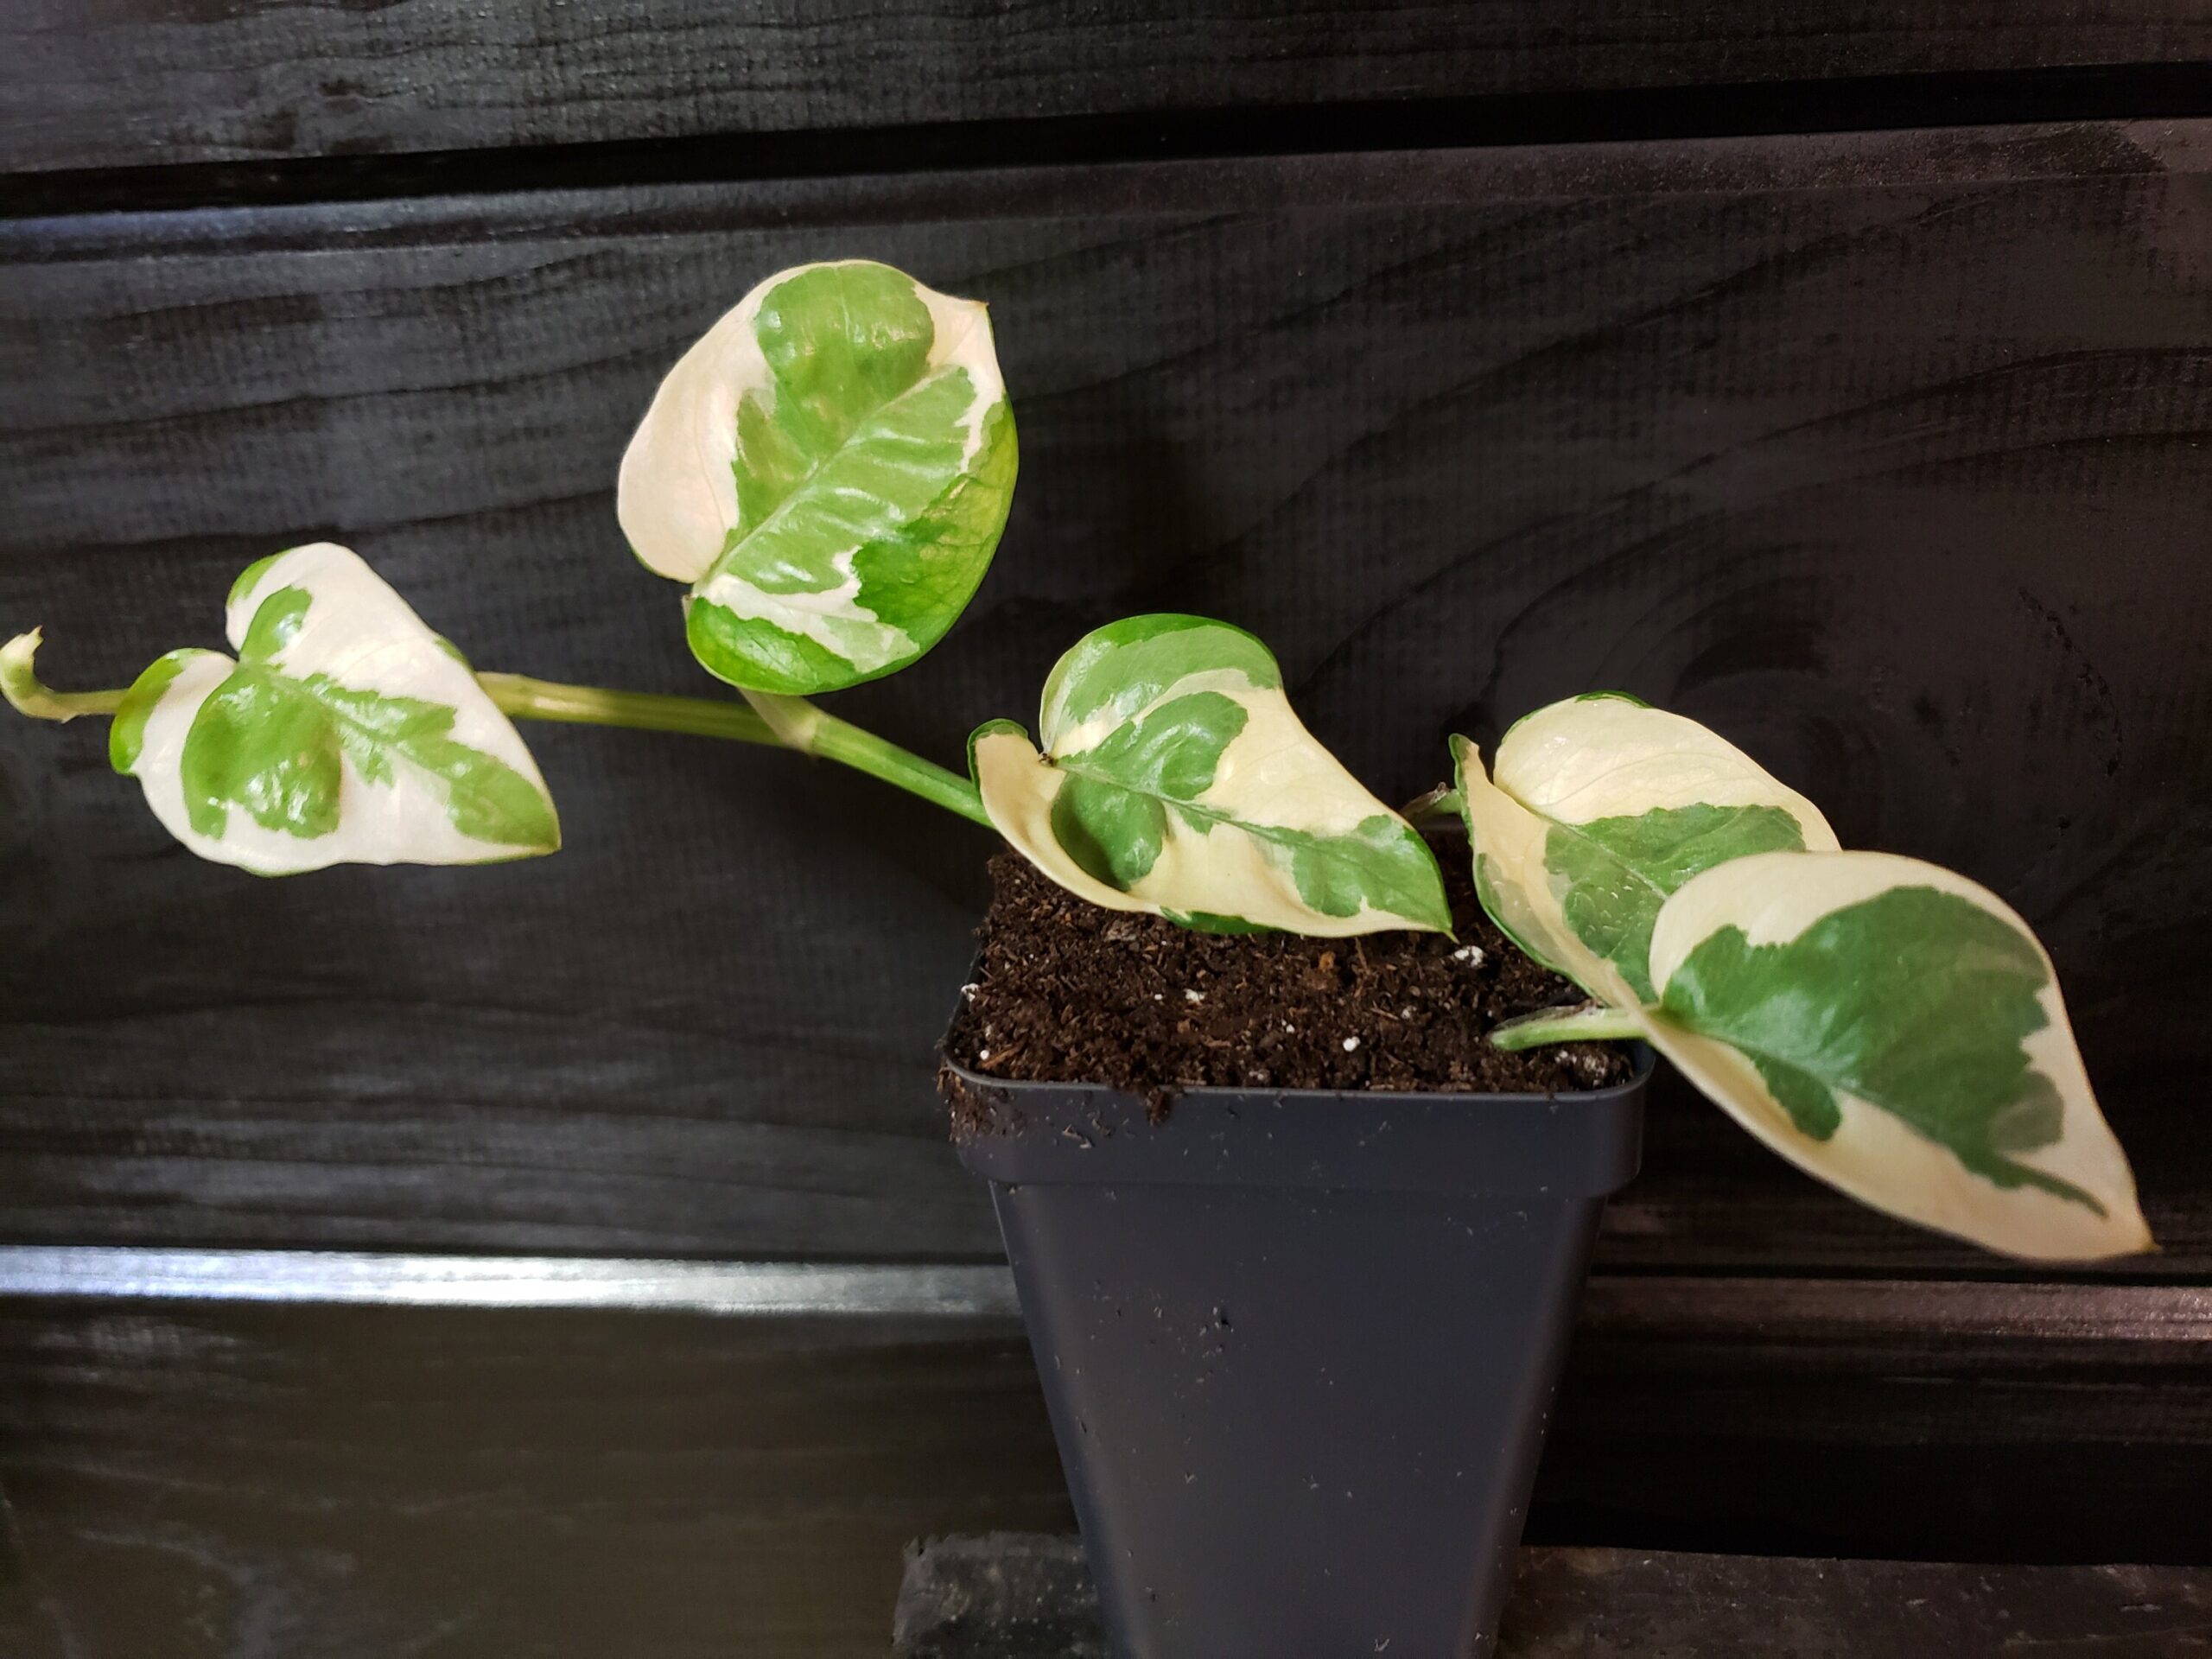 NJOY Pothos Houseplants Live Plant in Pot indoor small starter USA Seller RARE Fast Growing Plants for Home Decor House Plants Gift For Mom